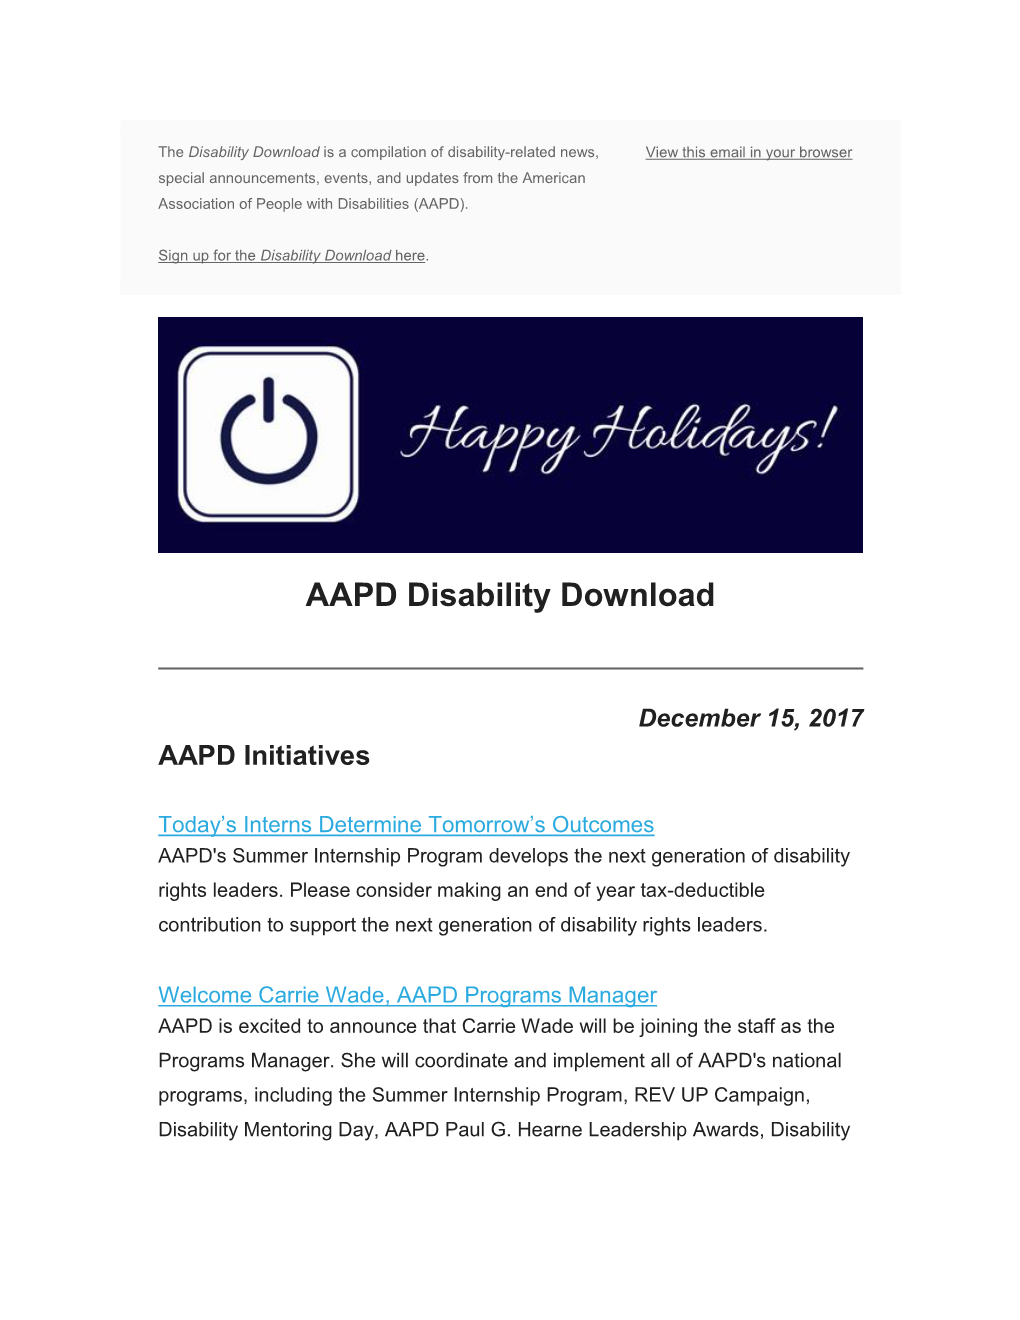 AAPD Disability Download